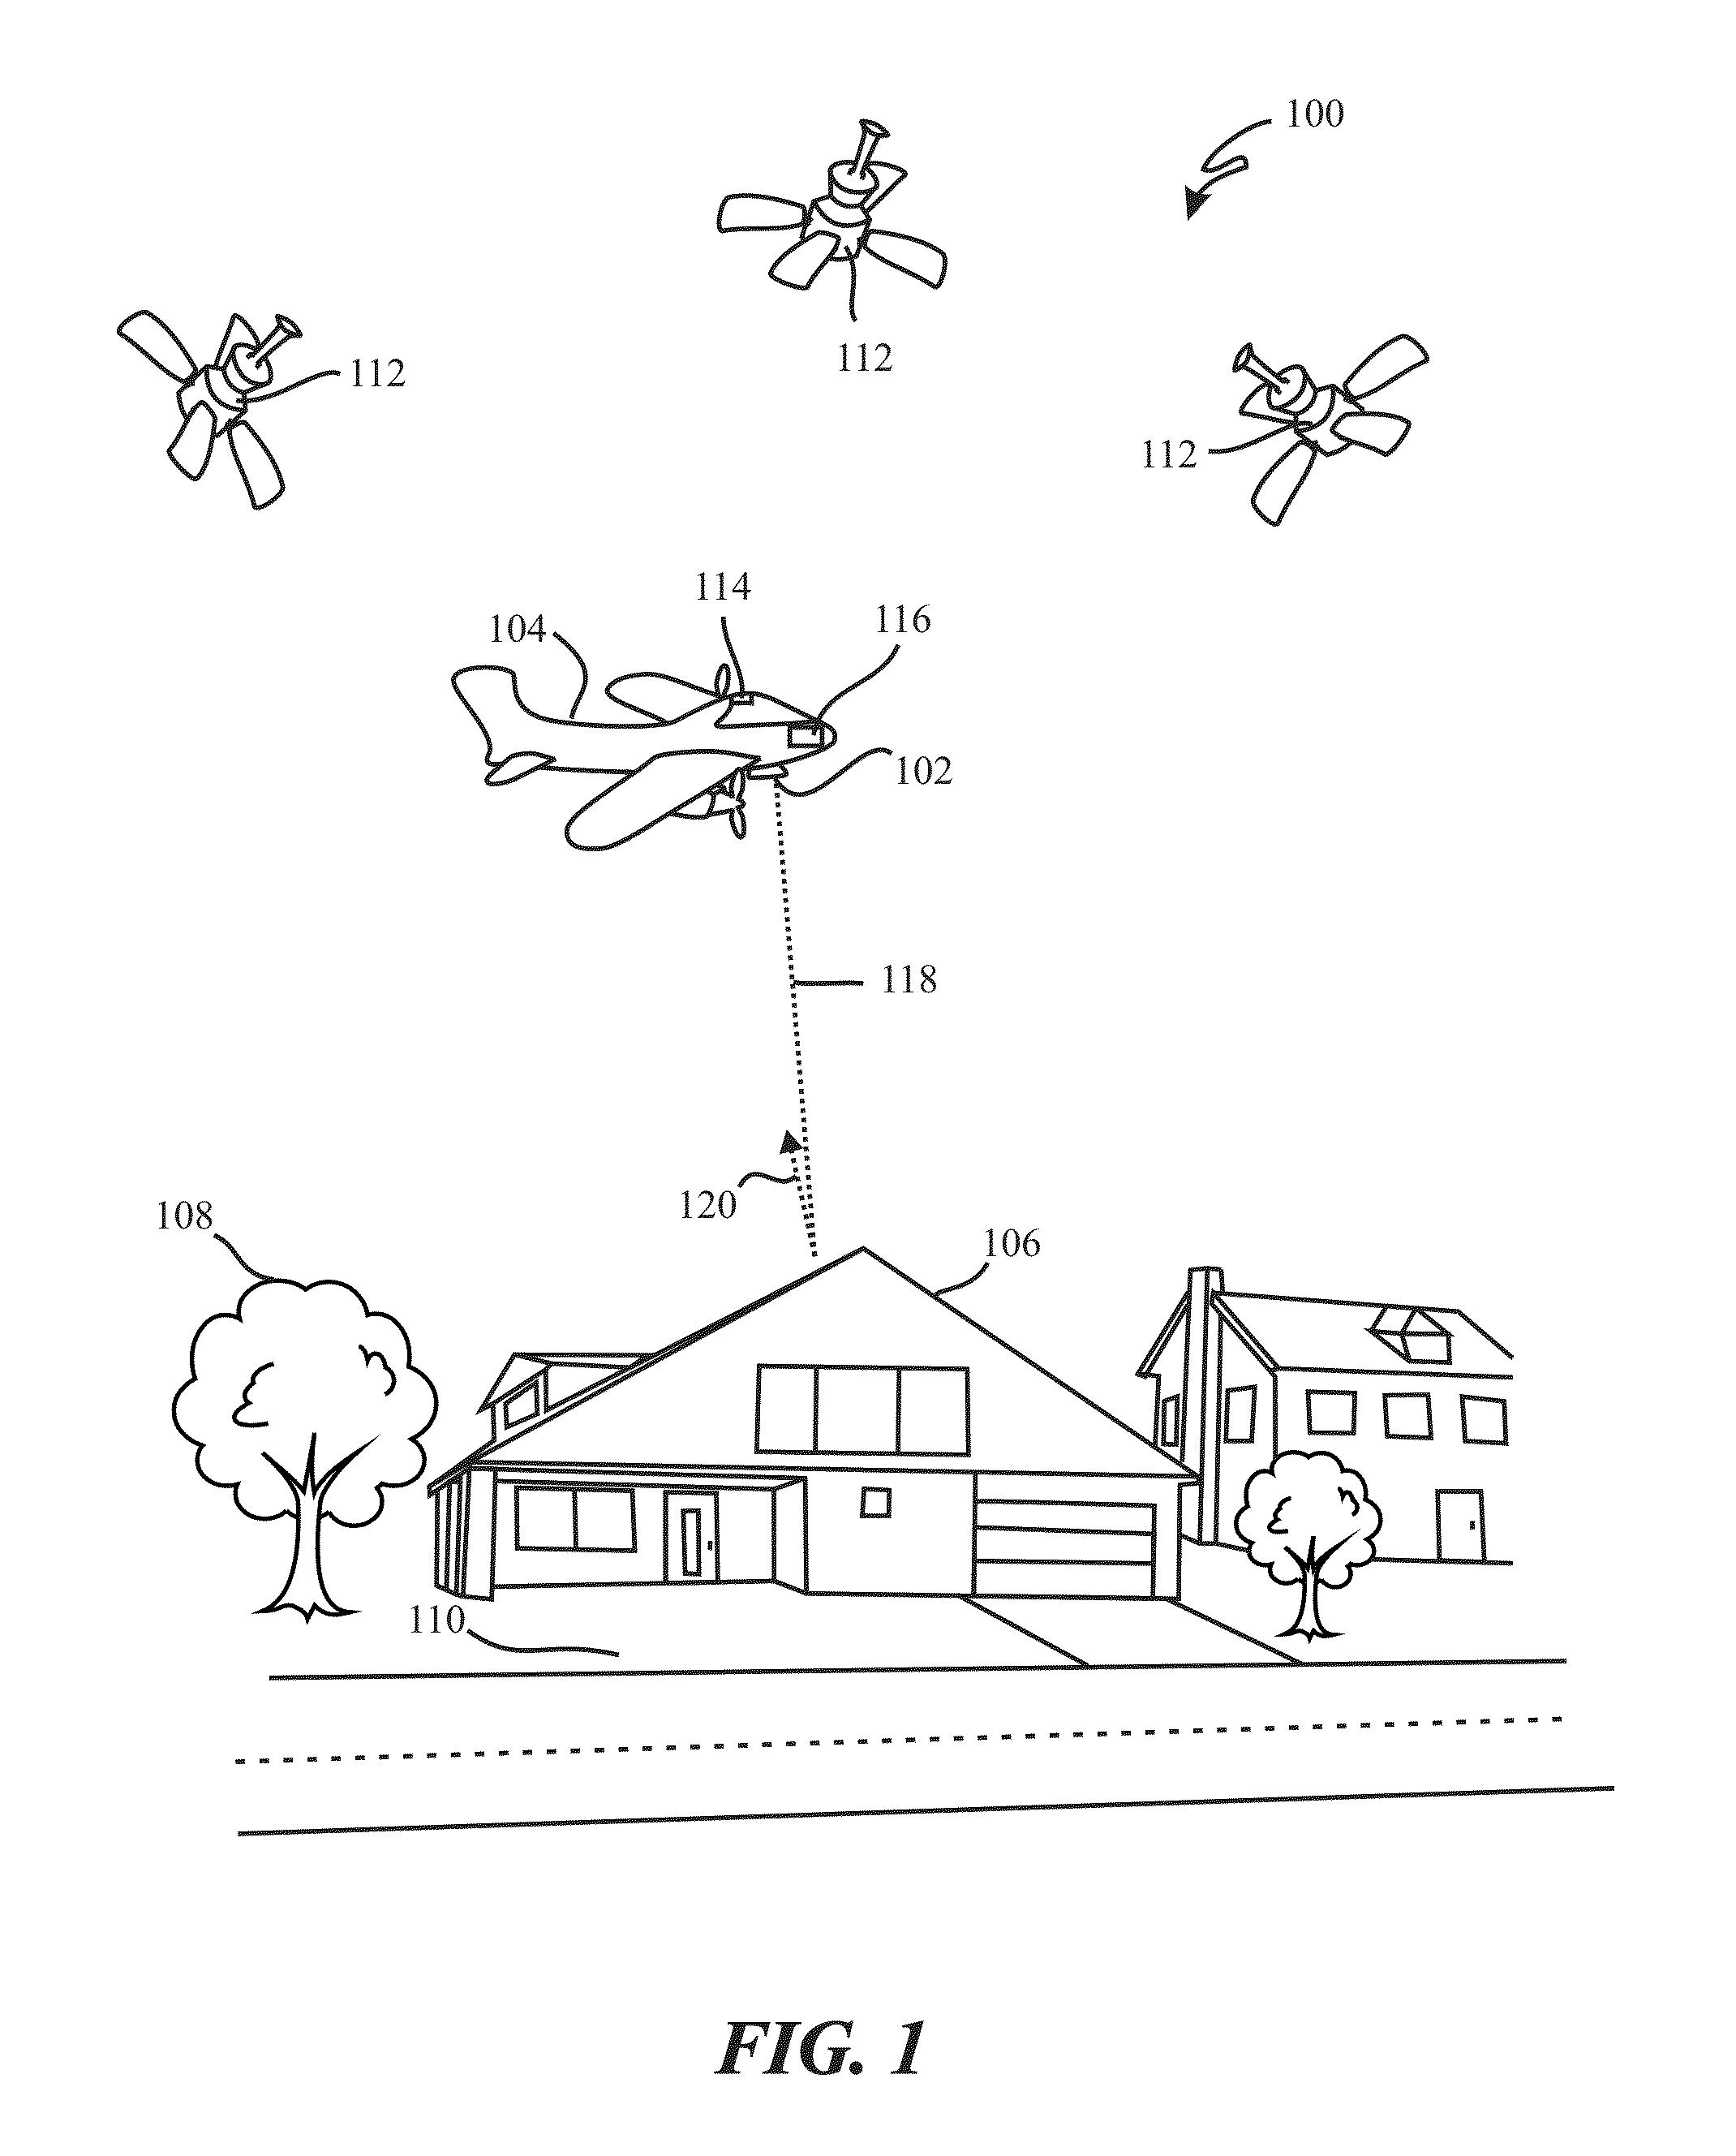 Light detection and ranging (LiDAR)data compression and decompression methods and apparatus